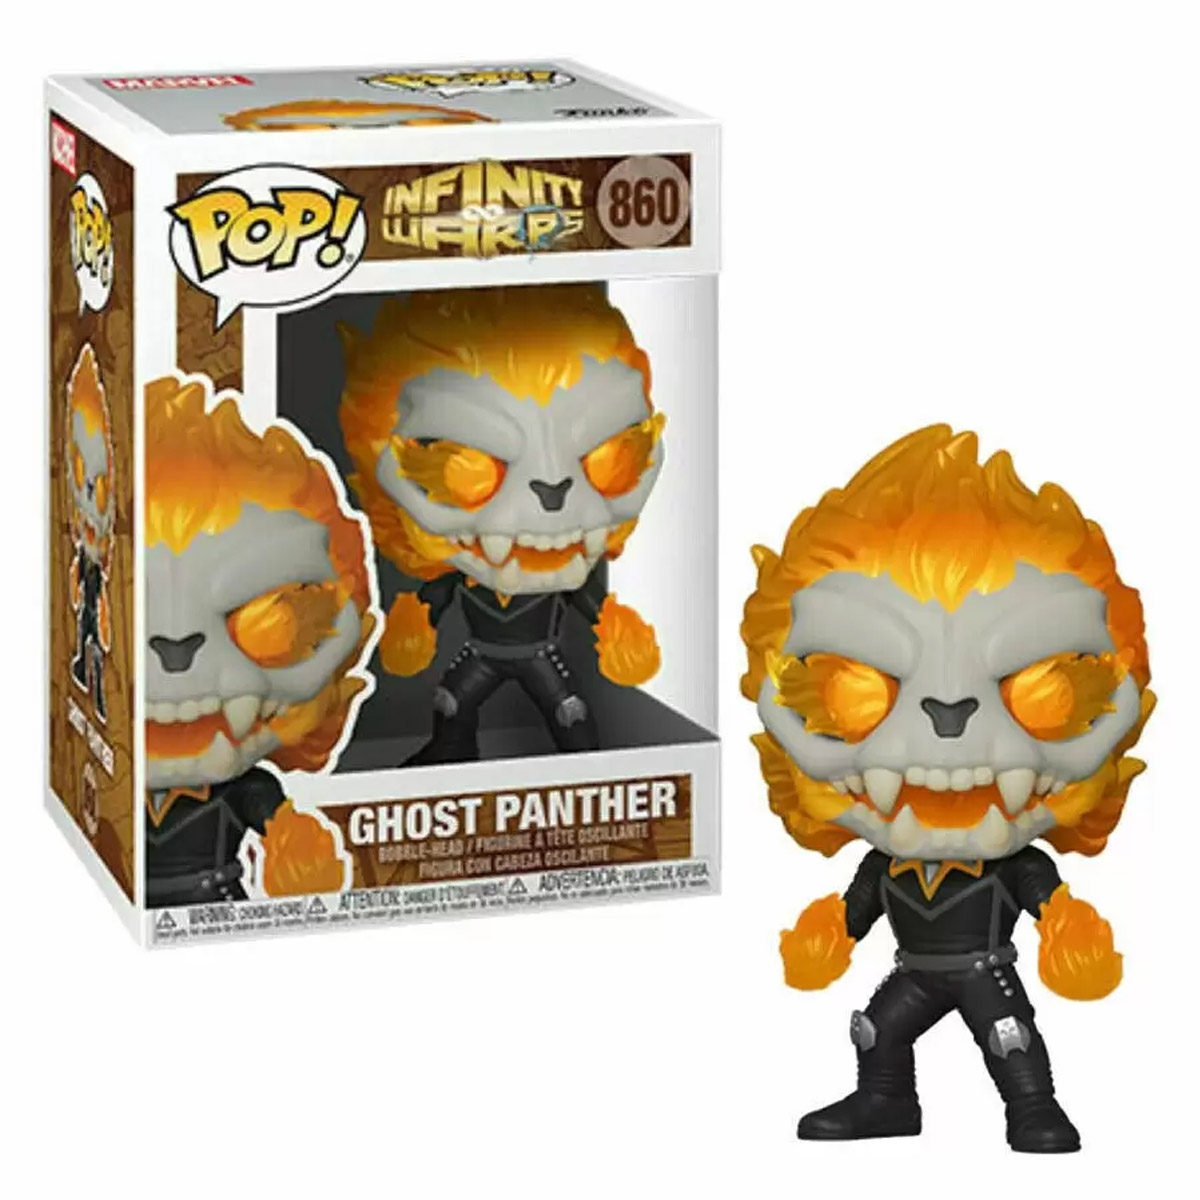 POP! Ghost panther Marvel...